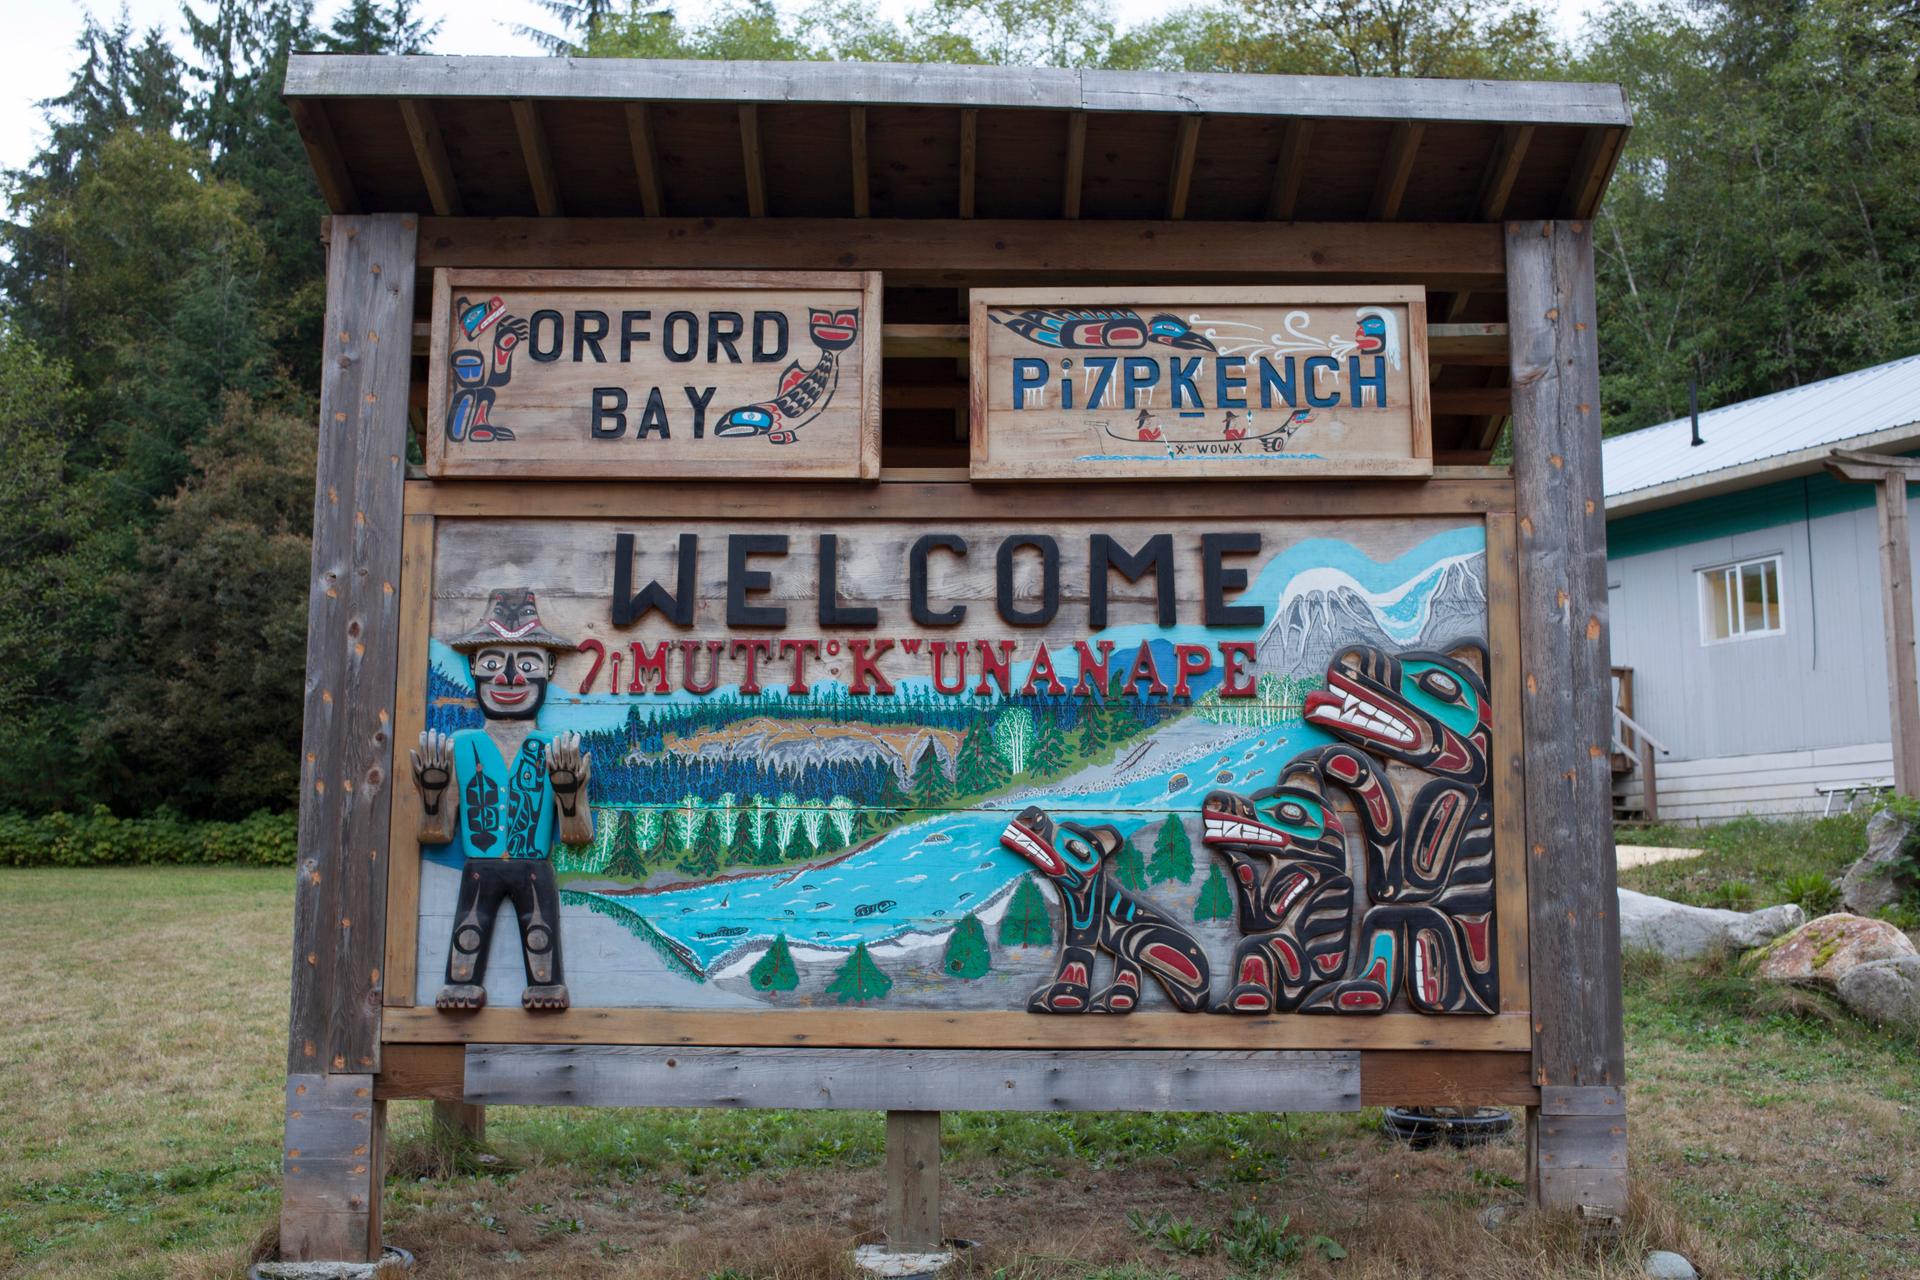 A sign welcomes visitors to the Orford Bay bear watching area in the Homalco Nation's traditional territory in western British Columbia.